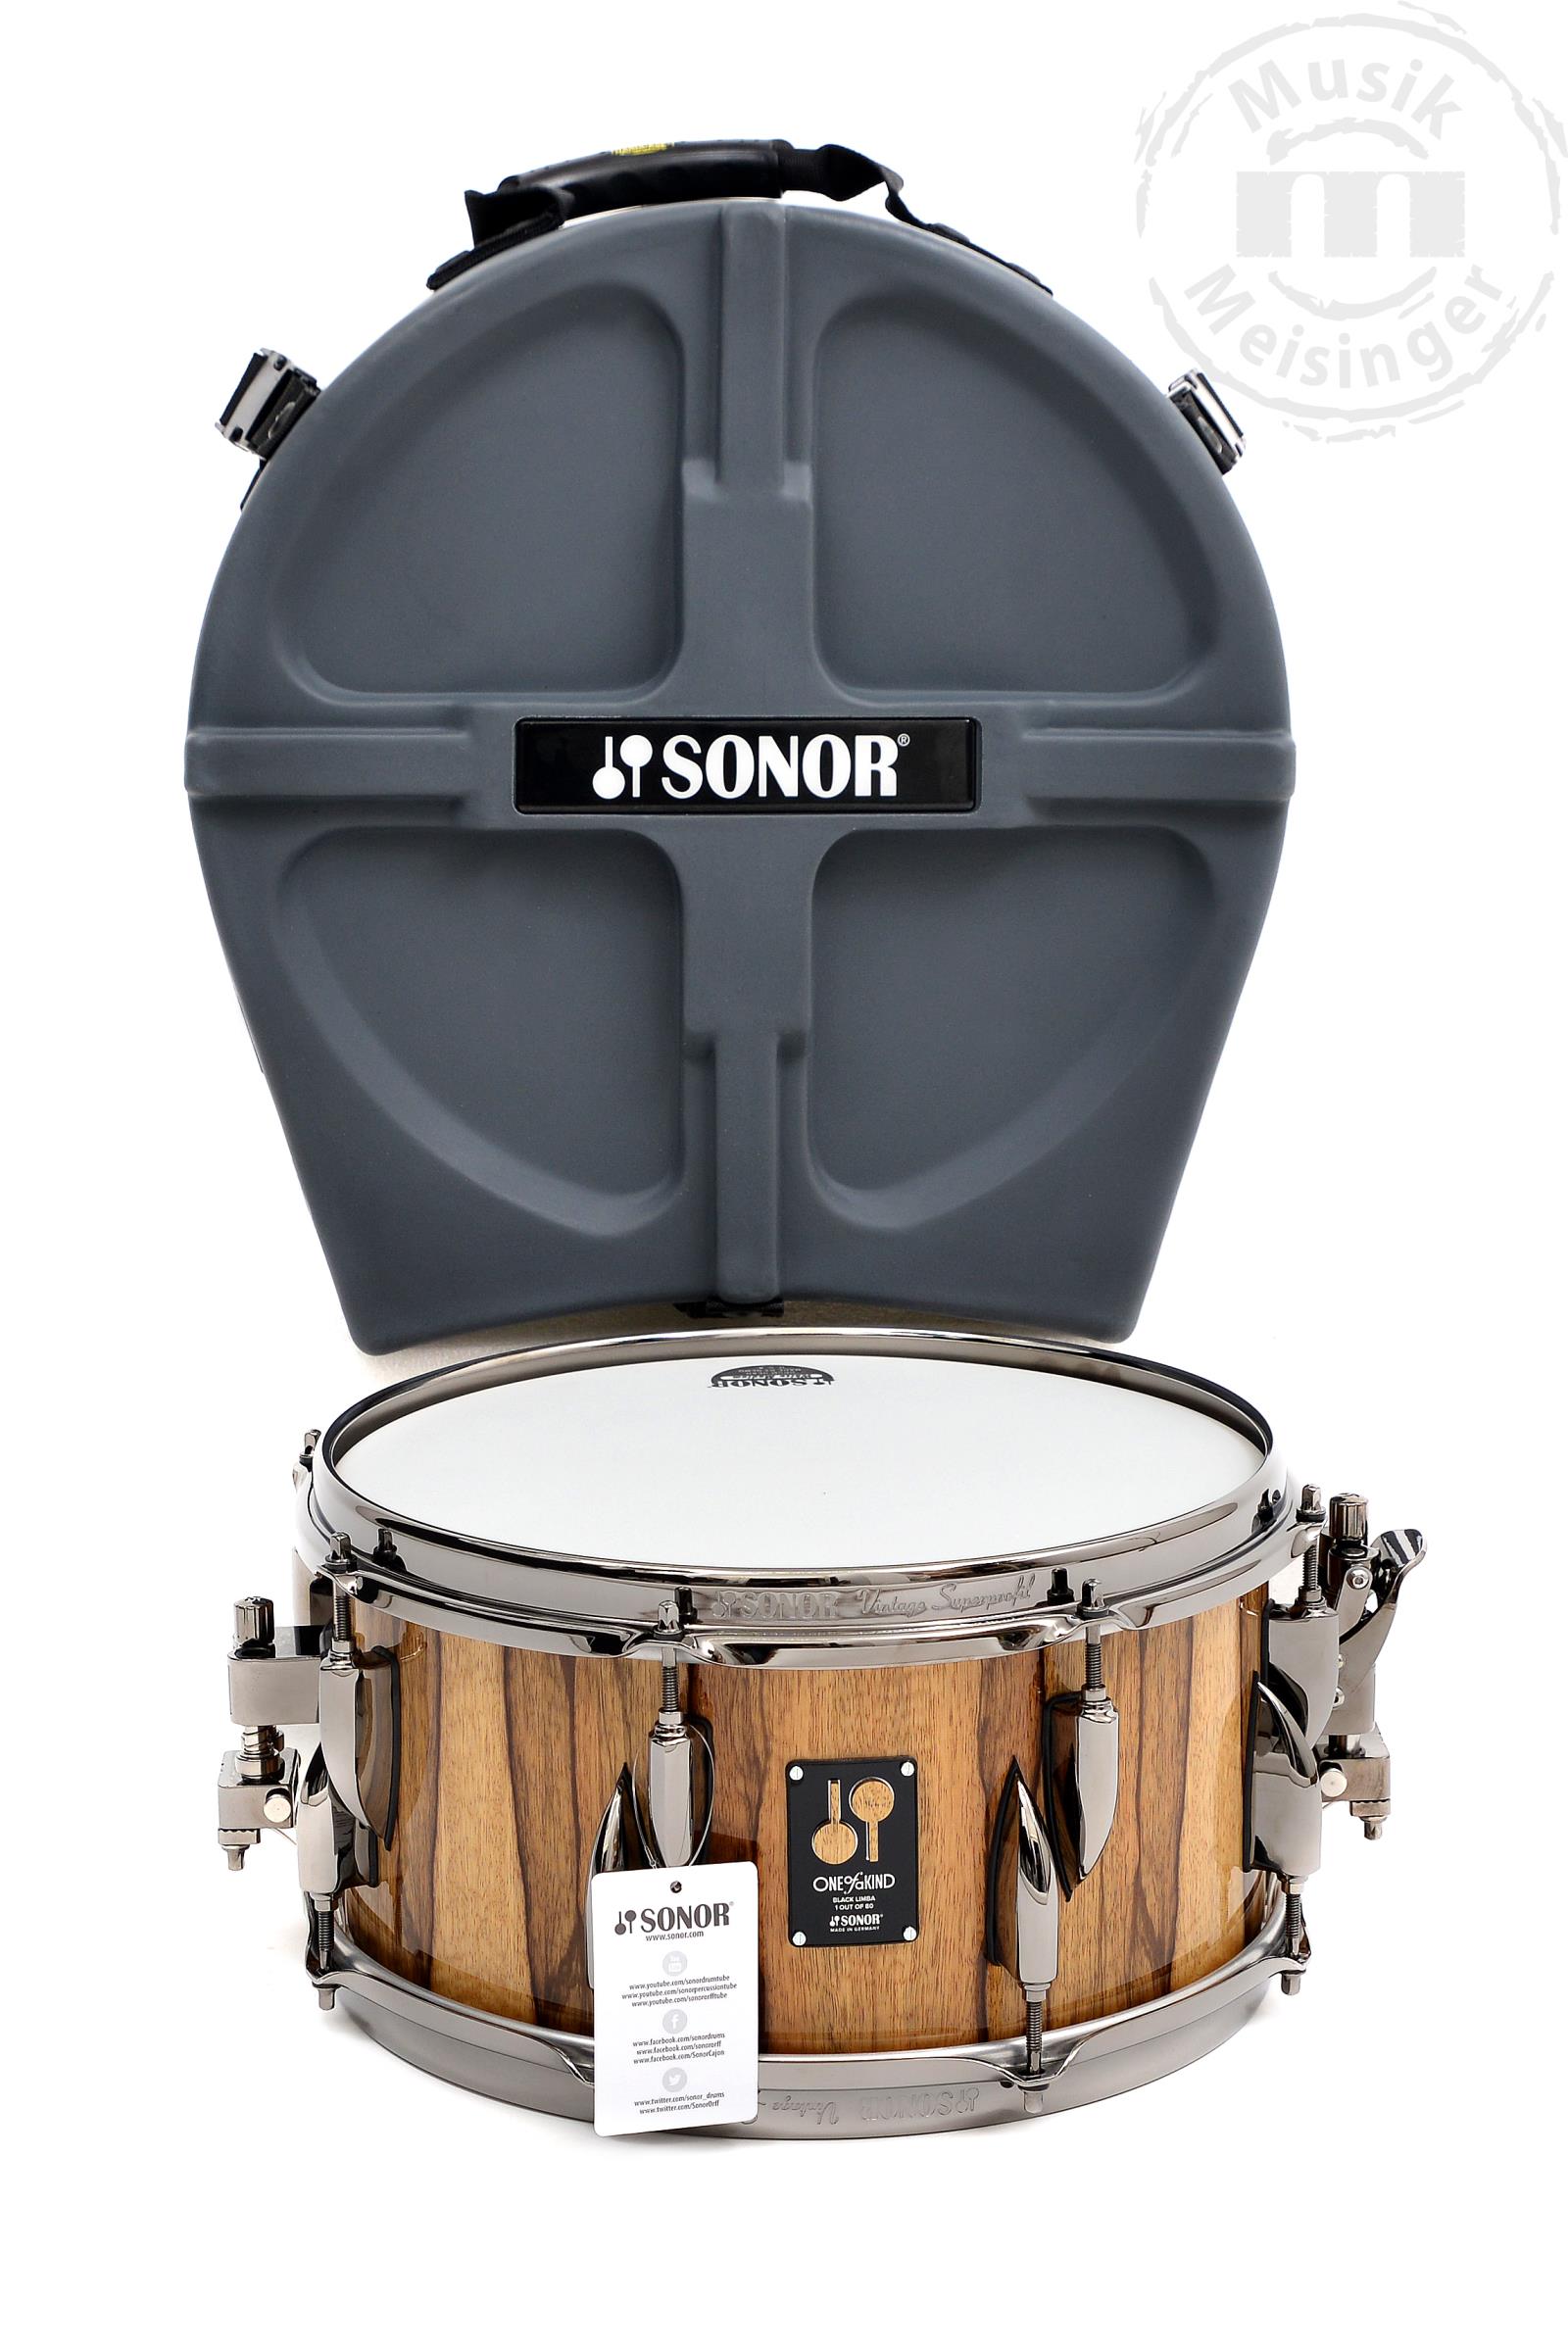 Sonor One of a Kind Snare Black Limba 13x6,5